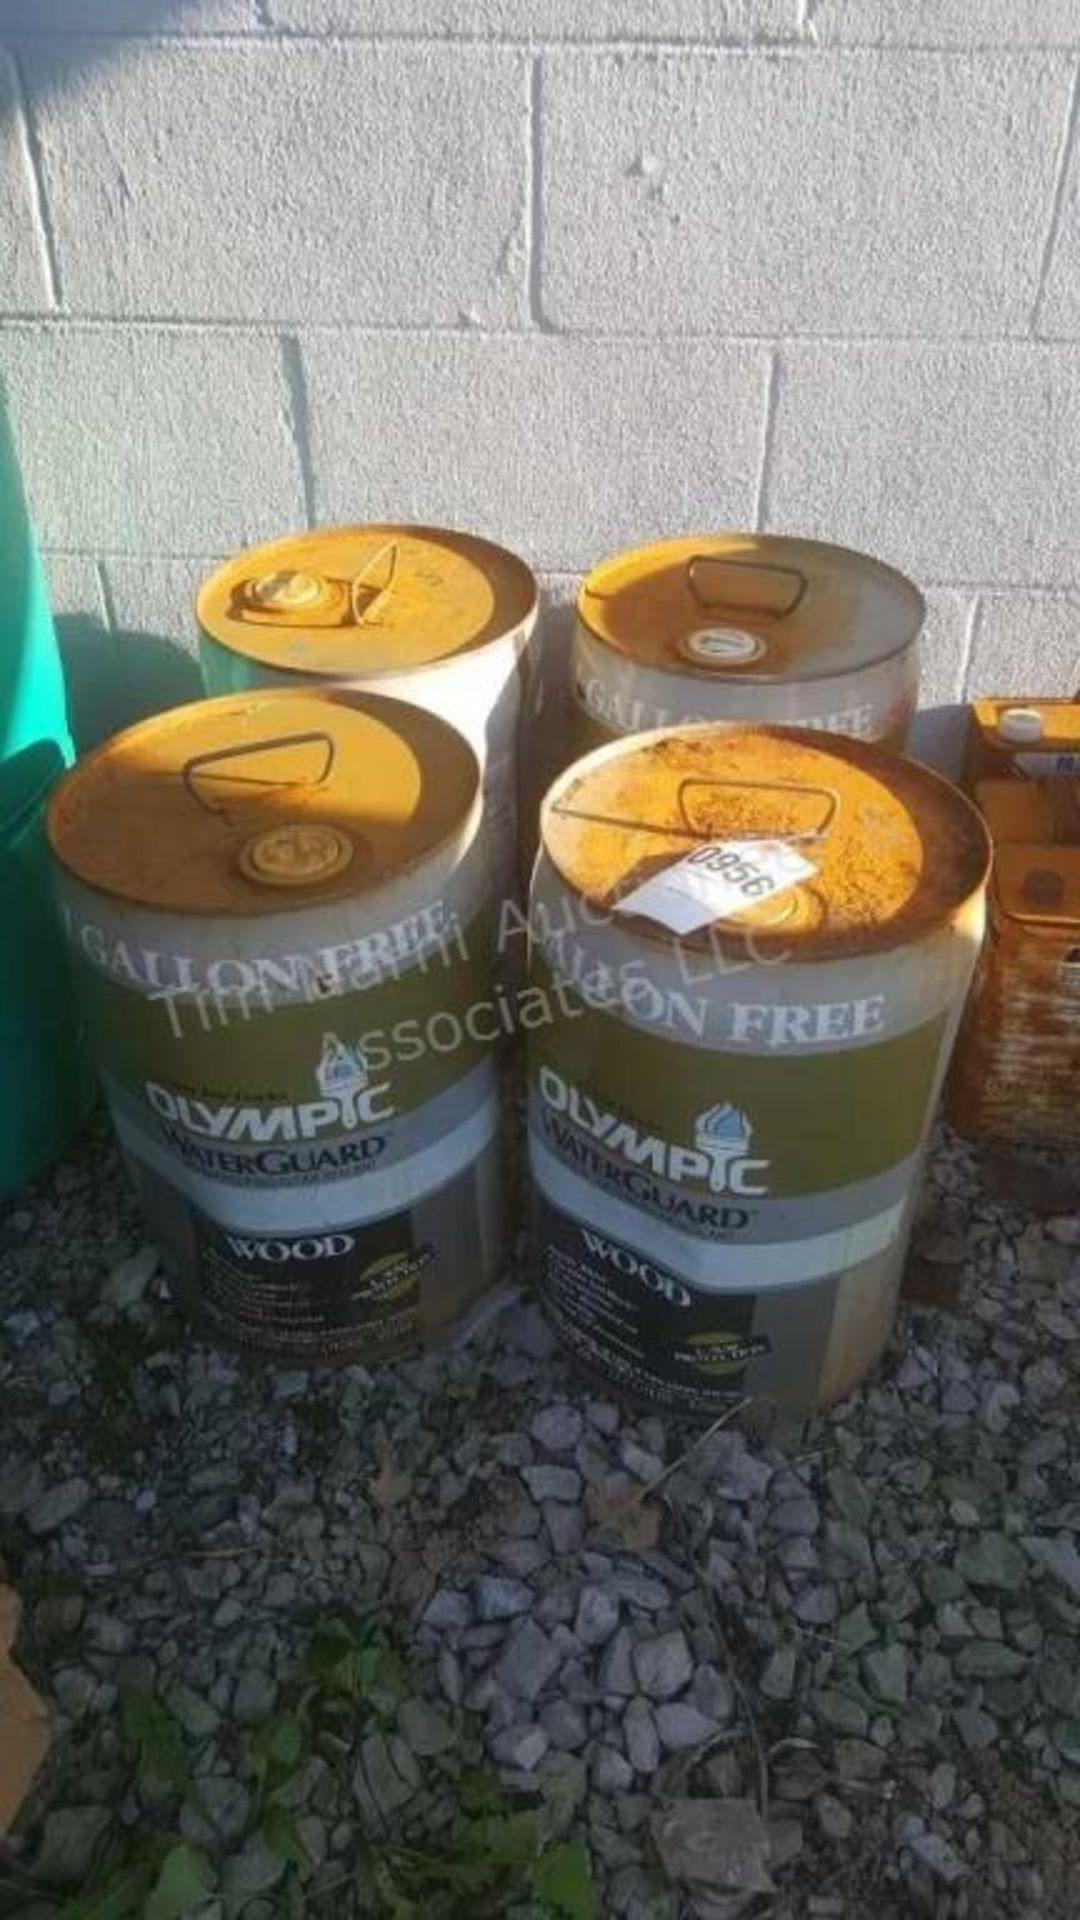 24 gallons of Olympic water guard wood sealer